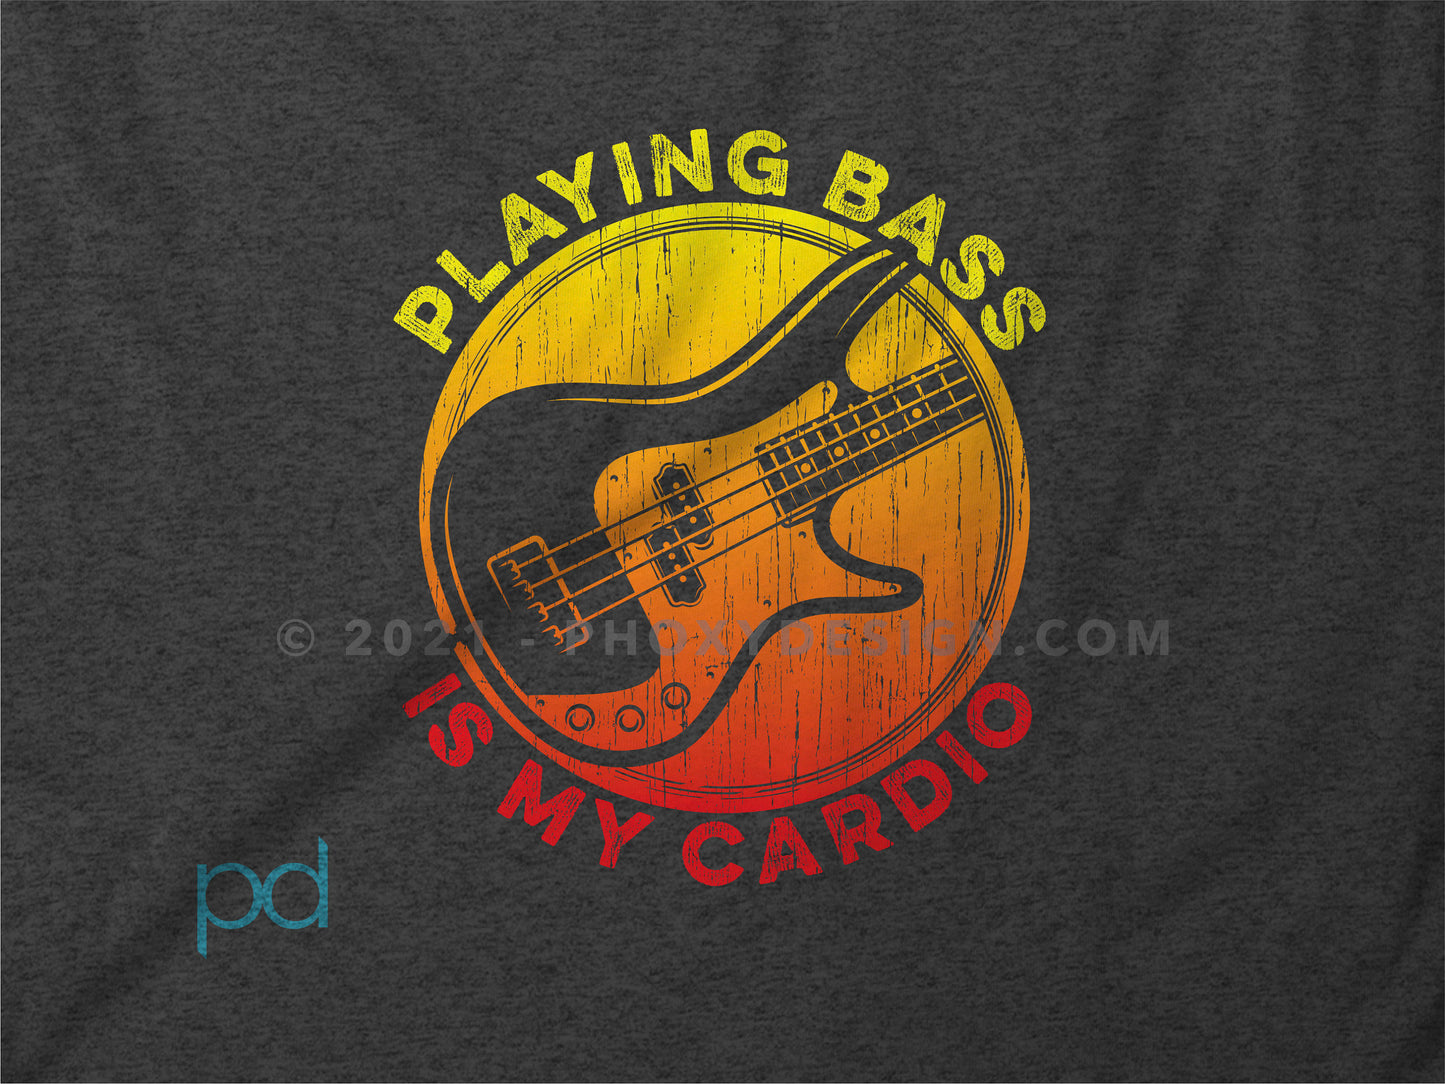 Funny Bass Player T Shirt Gift, Bassist Present Idea, Playing Bass Guitar Is My Cardio Tee Shirt T Top